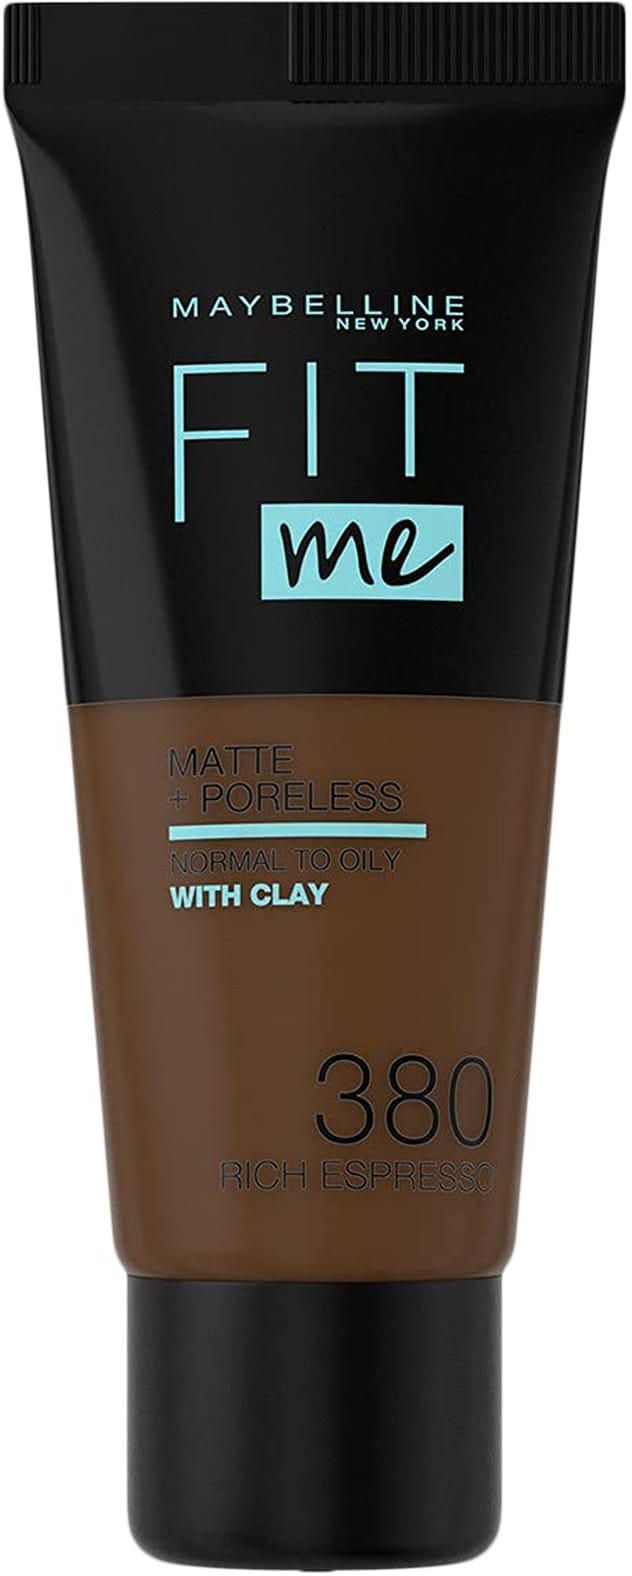 Maybelline New York Fit Me Matte And Poreless Foundation 380 Rich Espresso 30ml